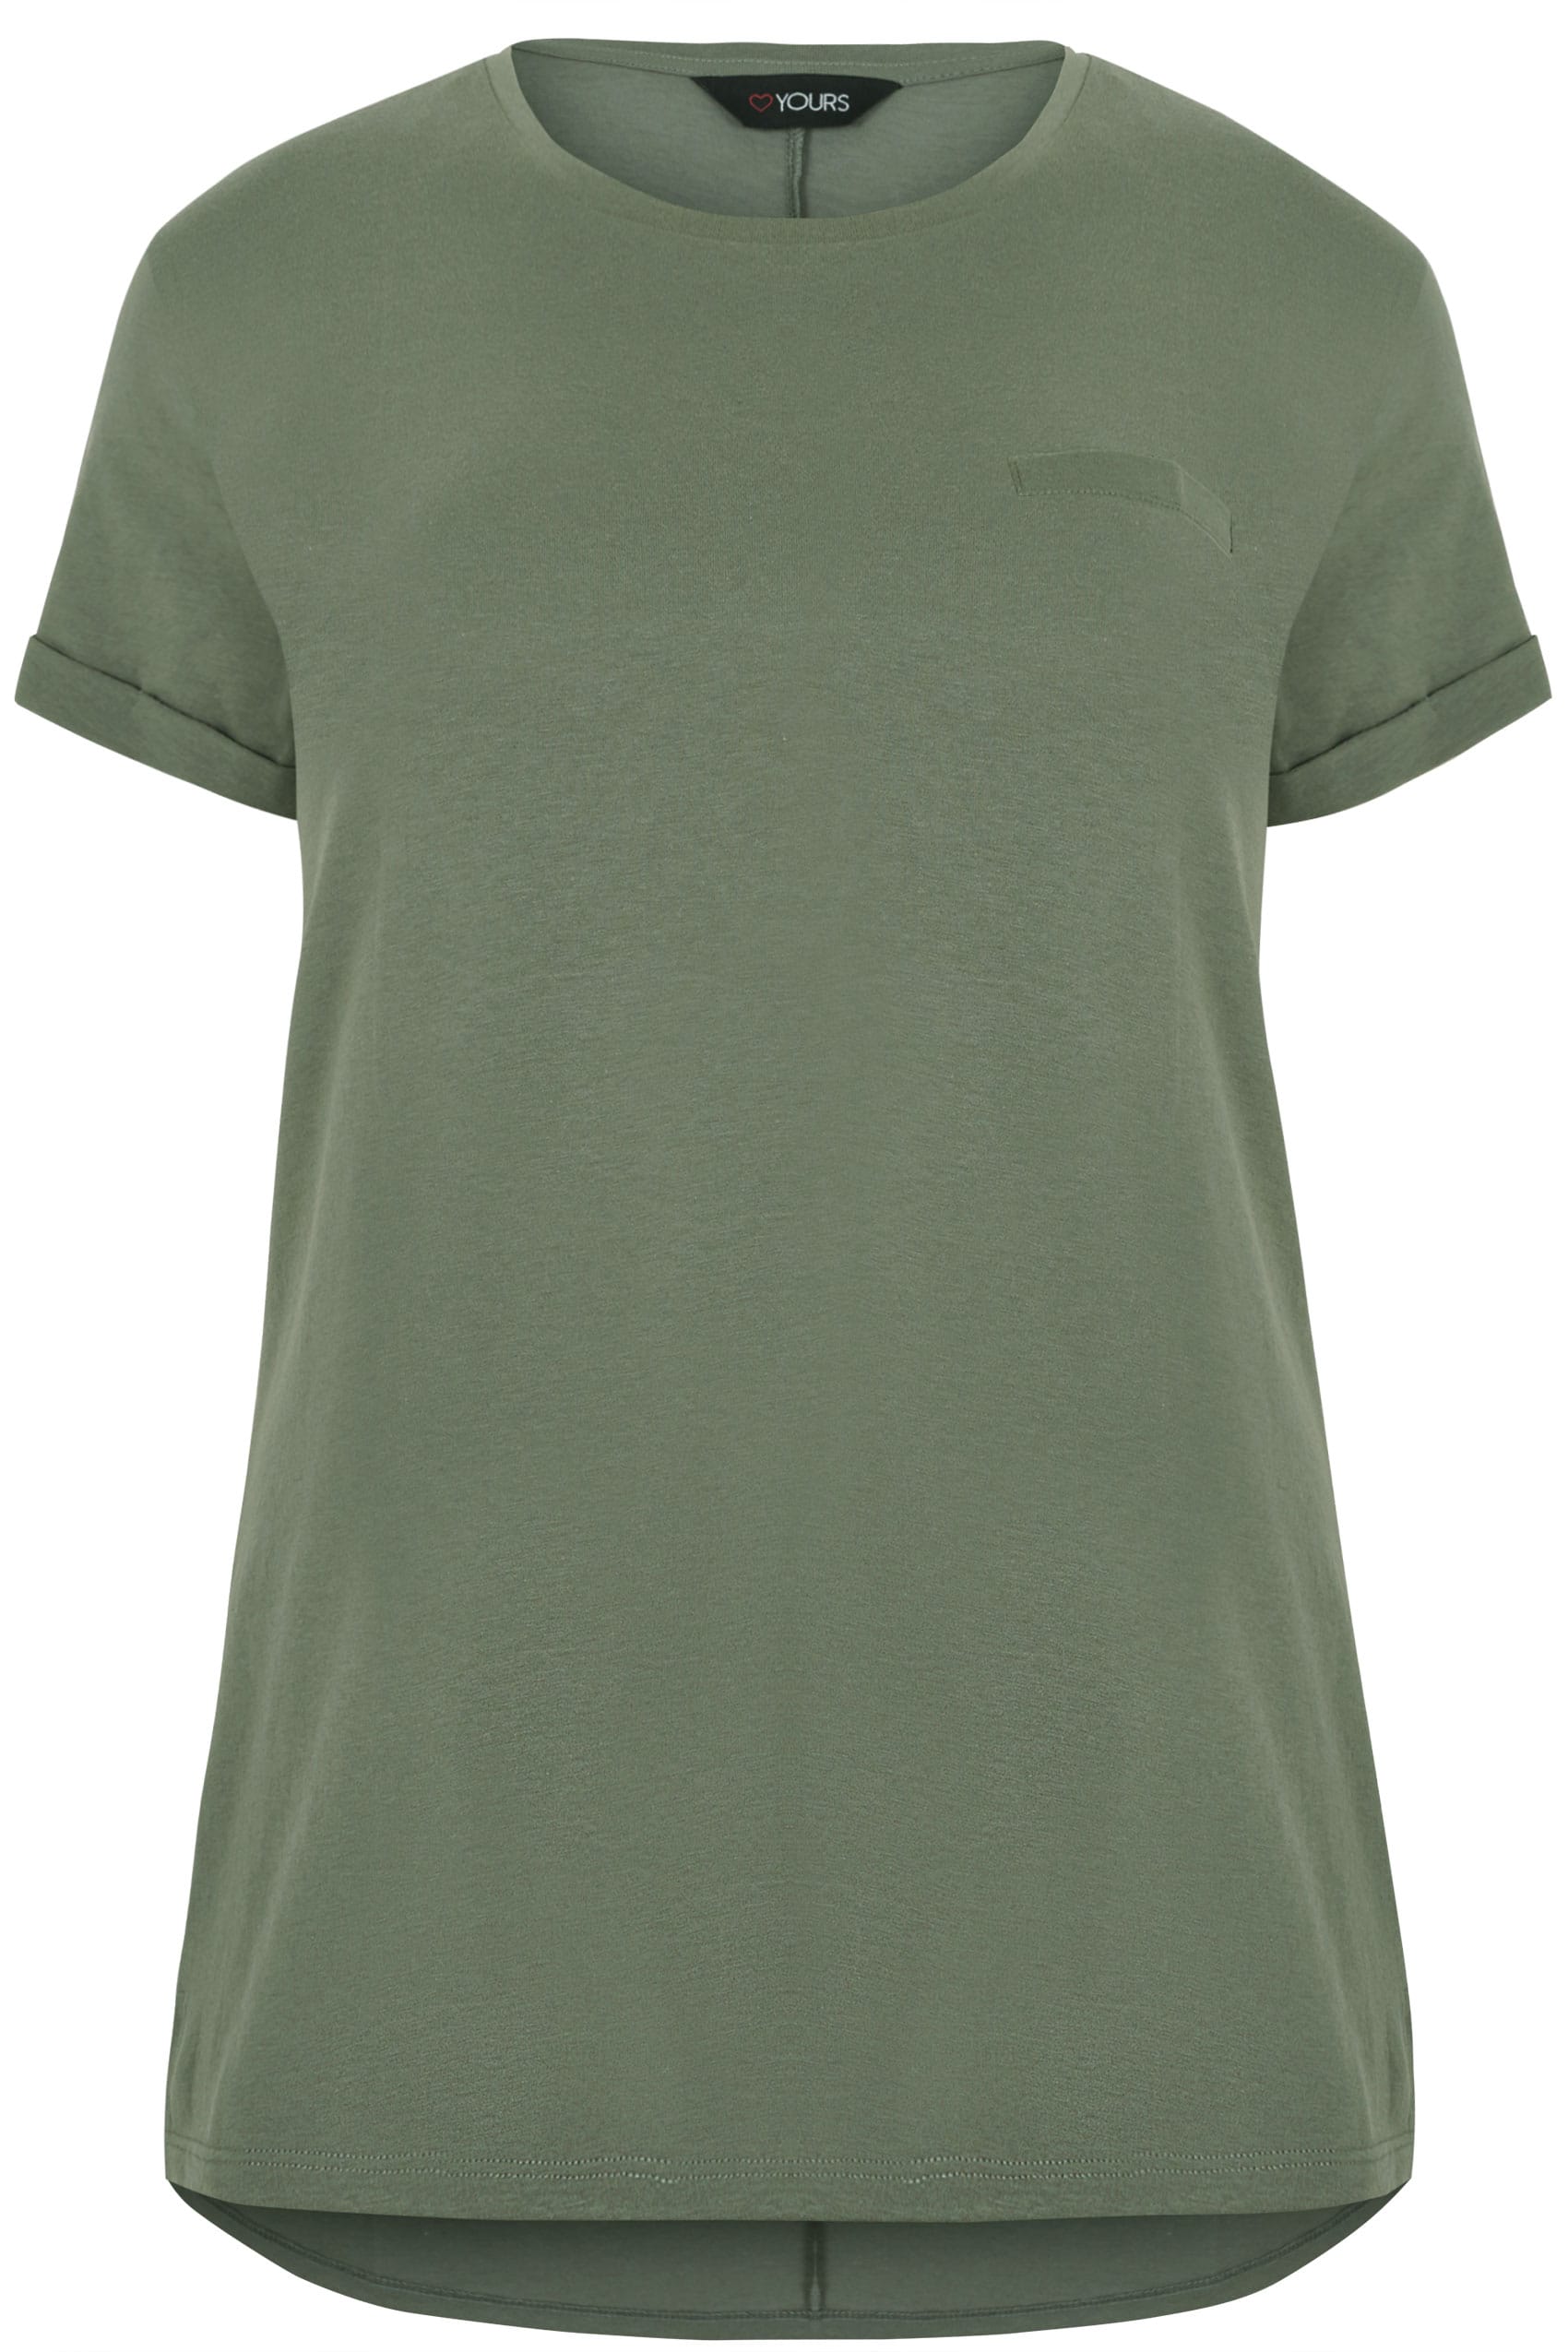 Download Khaki Green Mock Pocket T-Shirt With Curved Hem, Plus size 16 to 36